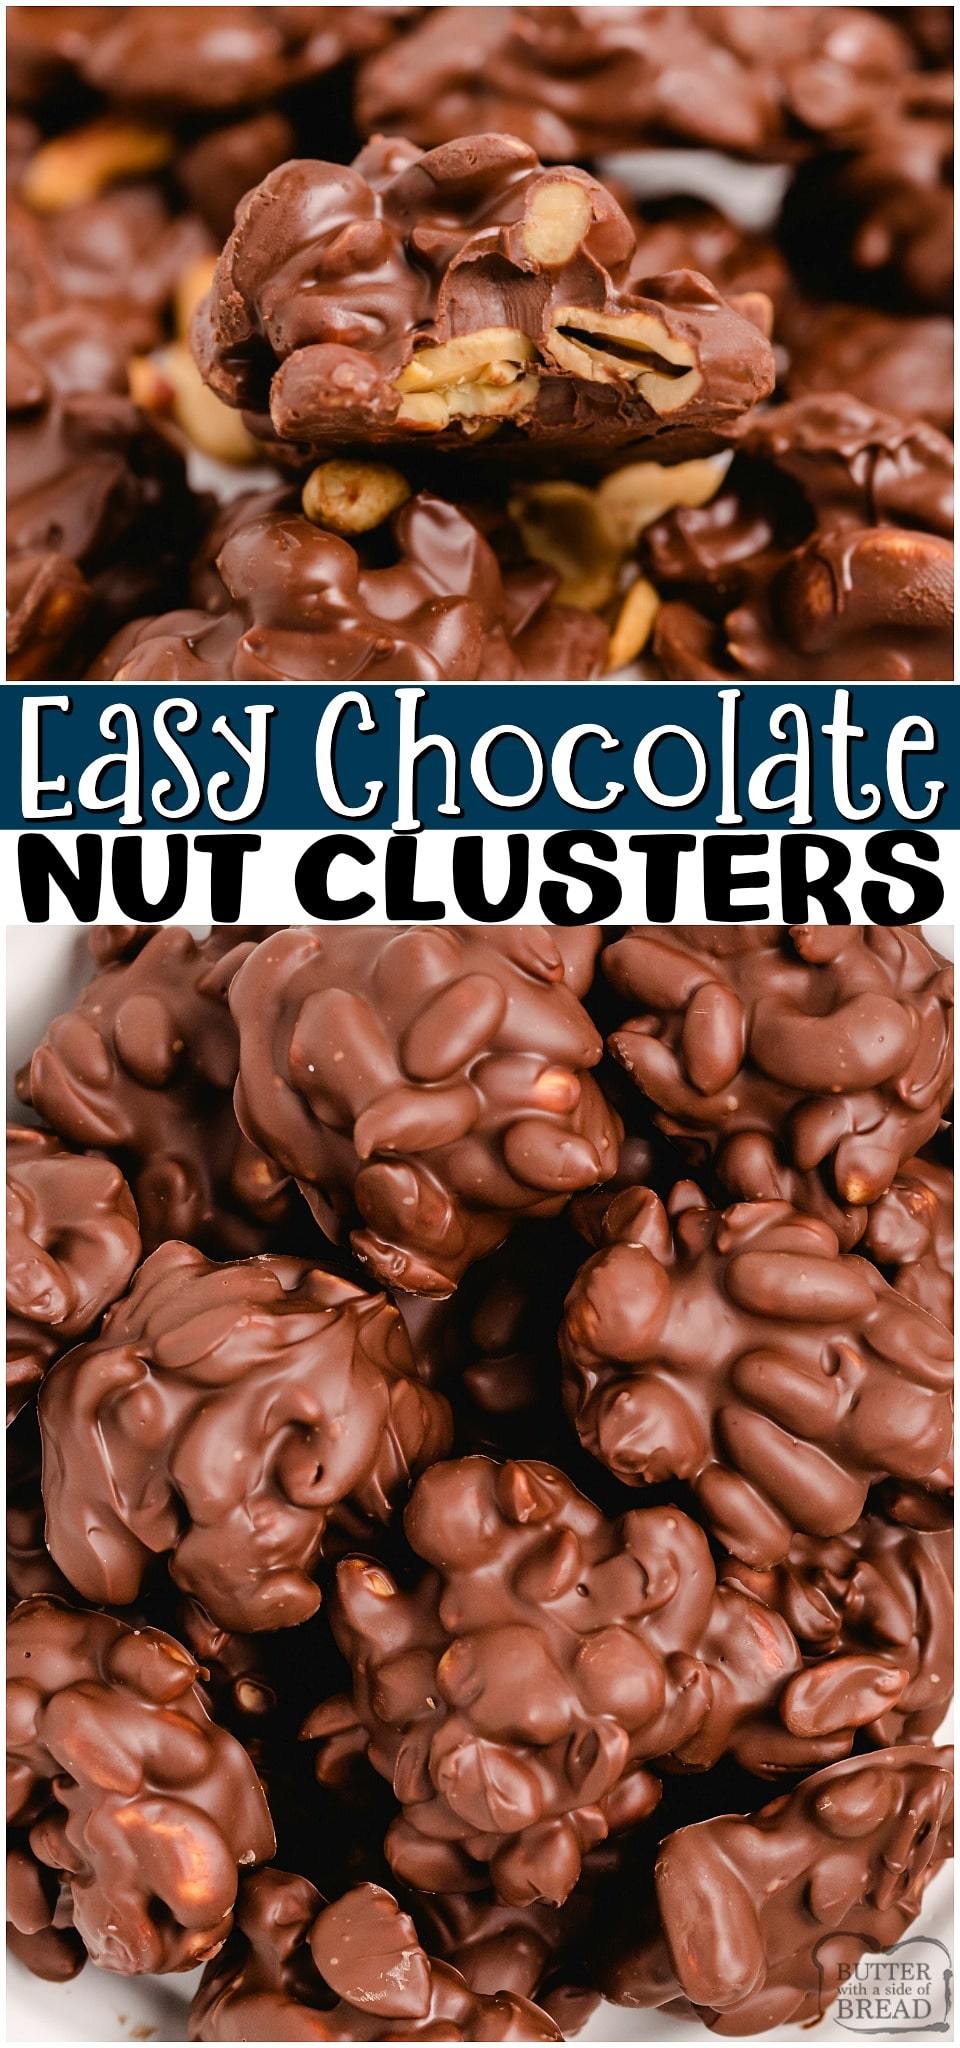 Chocolate Nut clusters are a fun & simple holiday treat! Salted Nuts covered in rich chocolate cooled & set into perfect candy clusters for gift trays! #chocolate #nuts #candy #easyrecipe from BUTTER WITH A SIDE OF BREAD